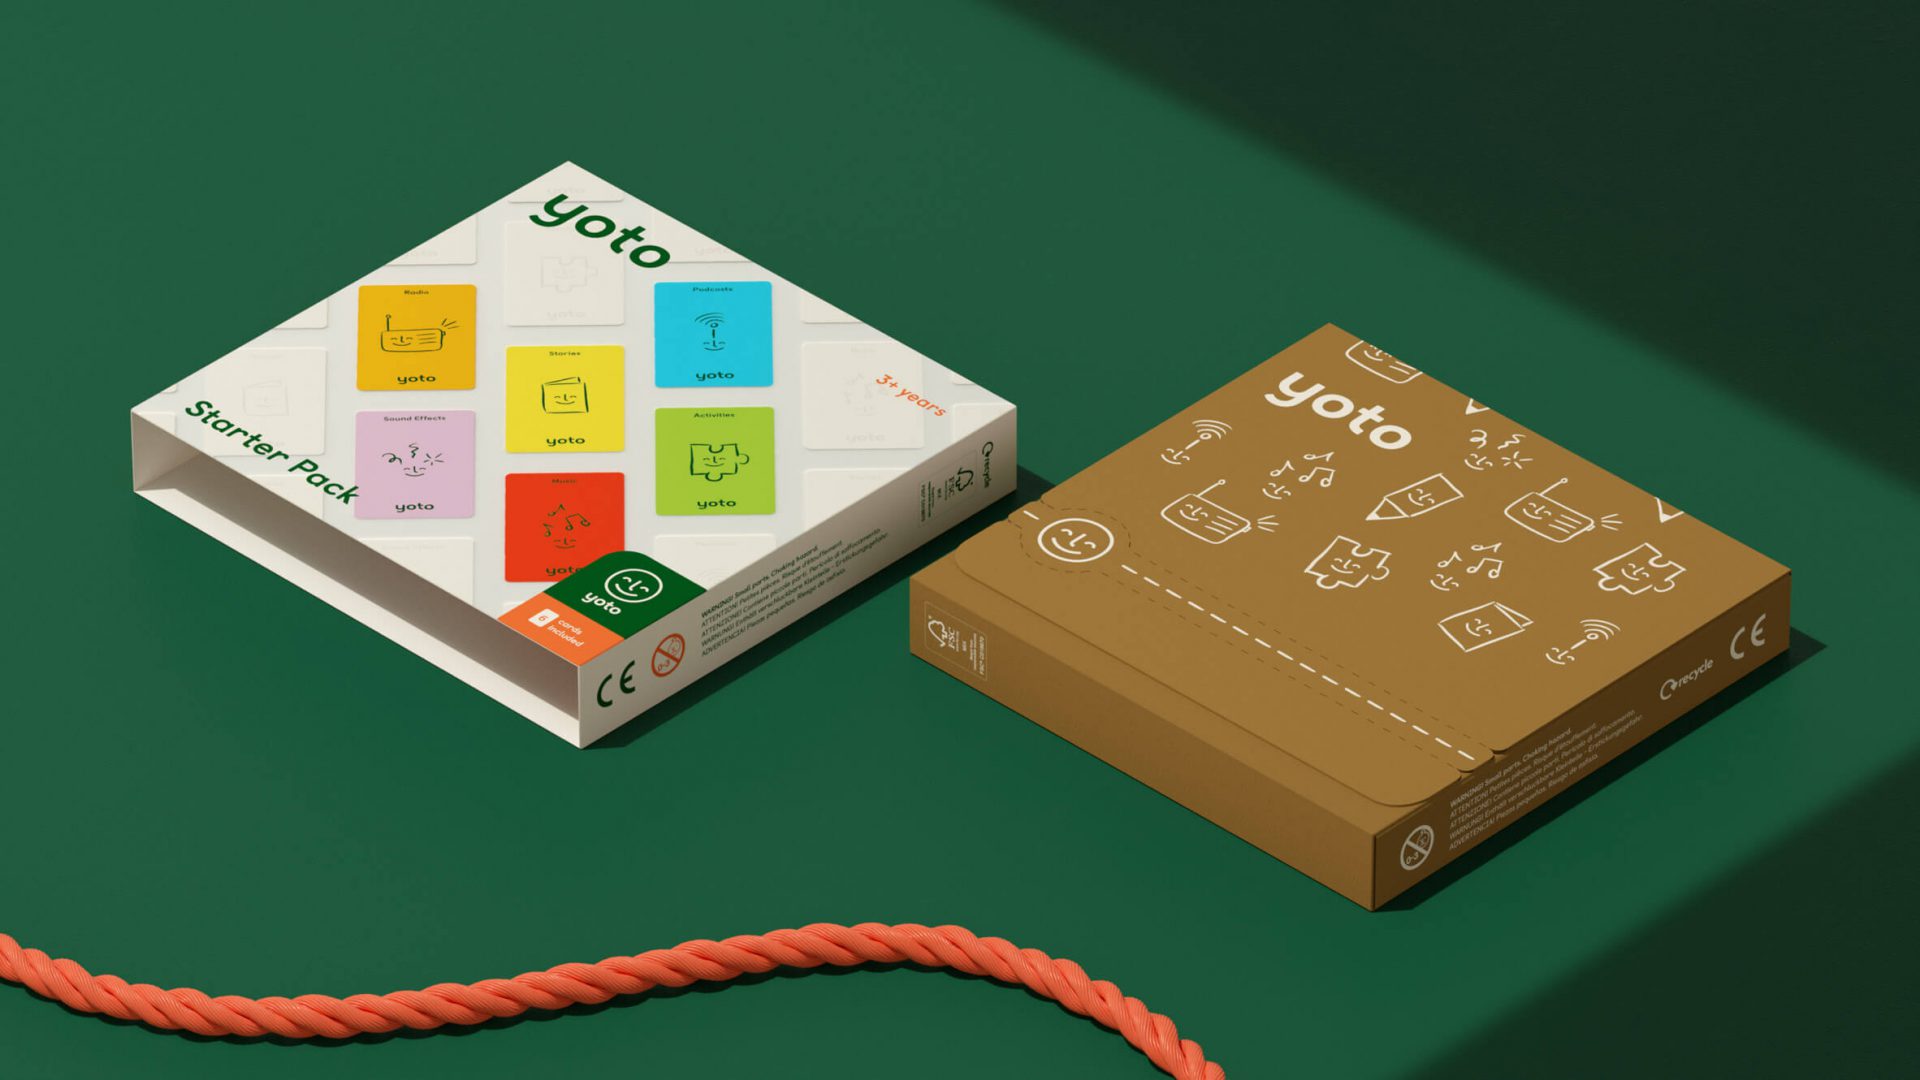 Yoto Player - set of cards